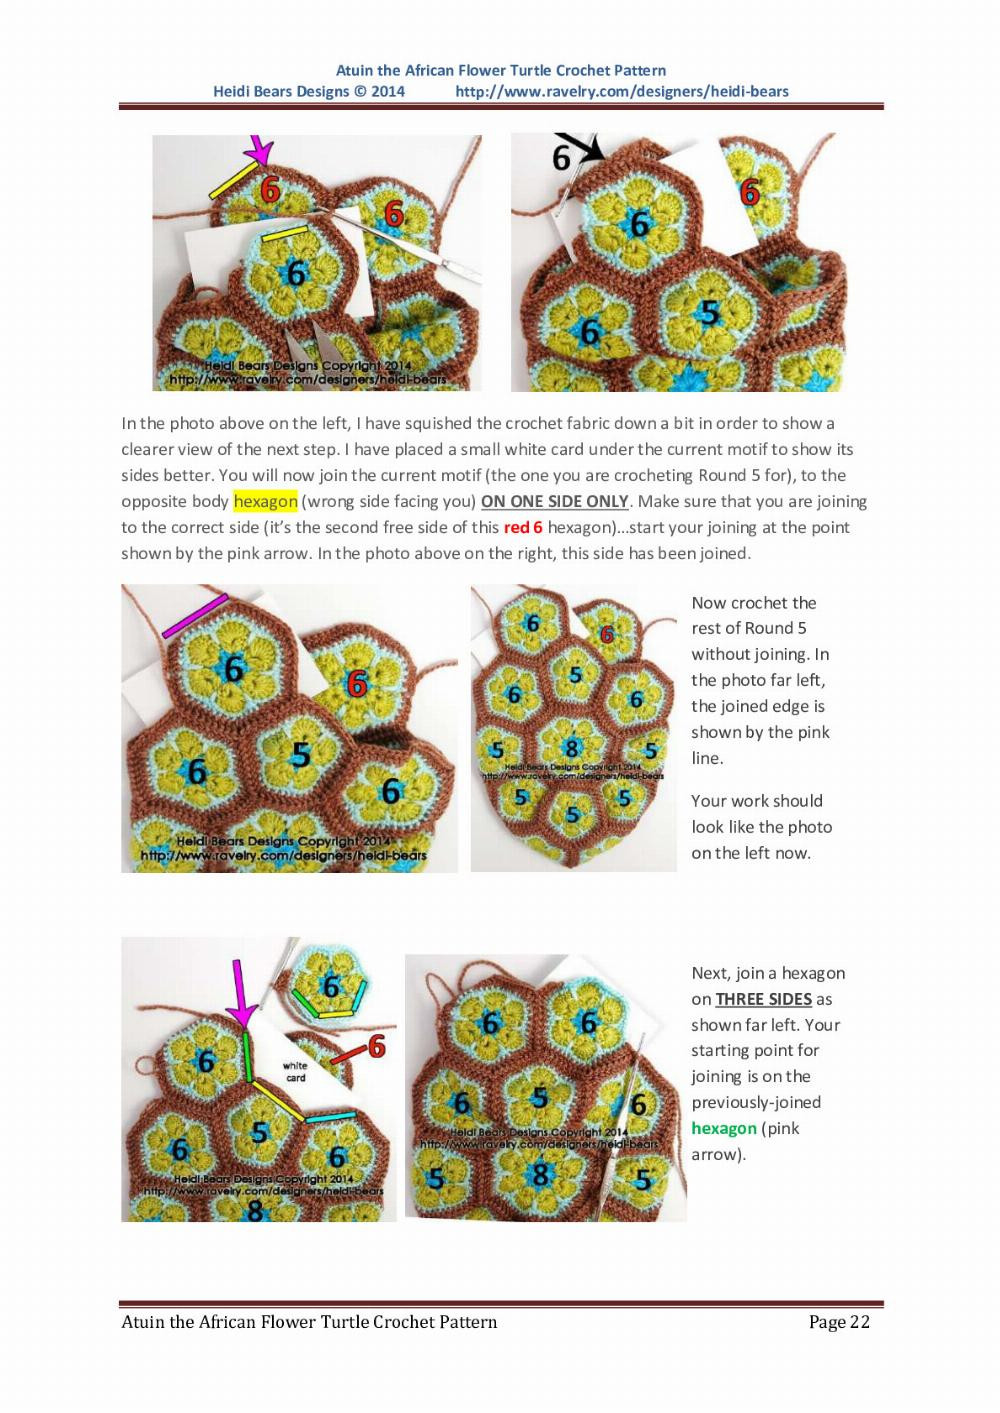 Atuin the African Flower Turtle Crochet Pattern